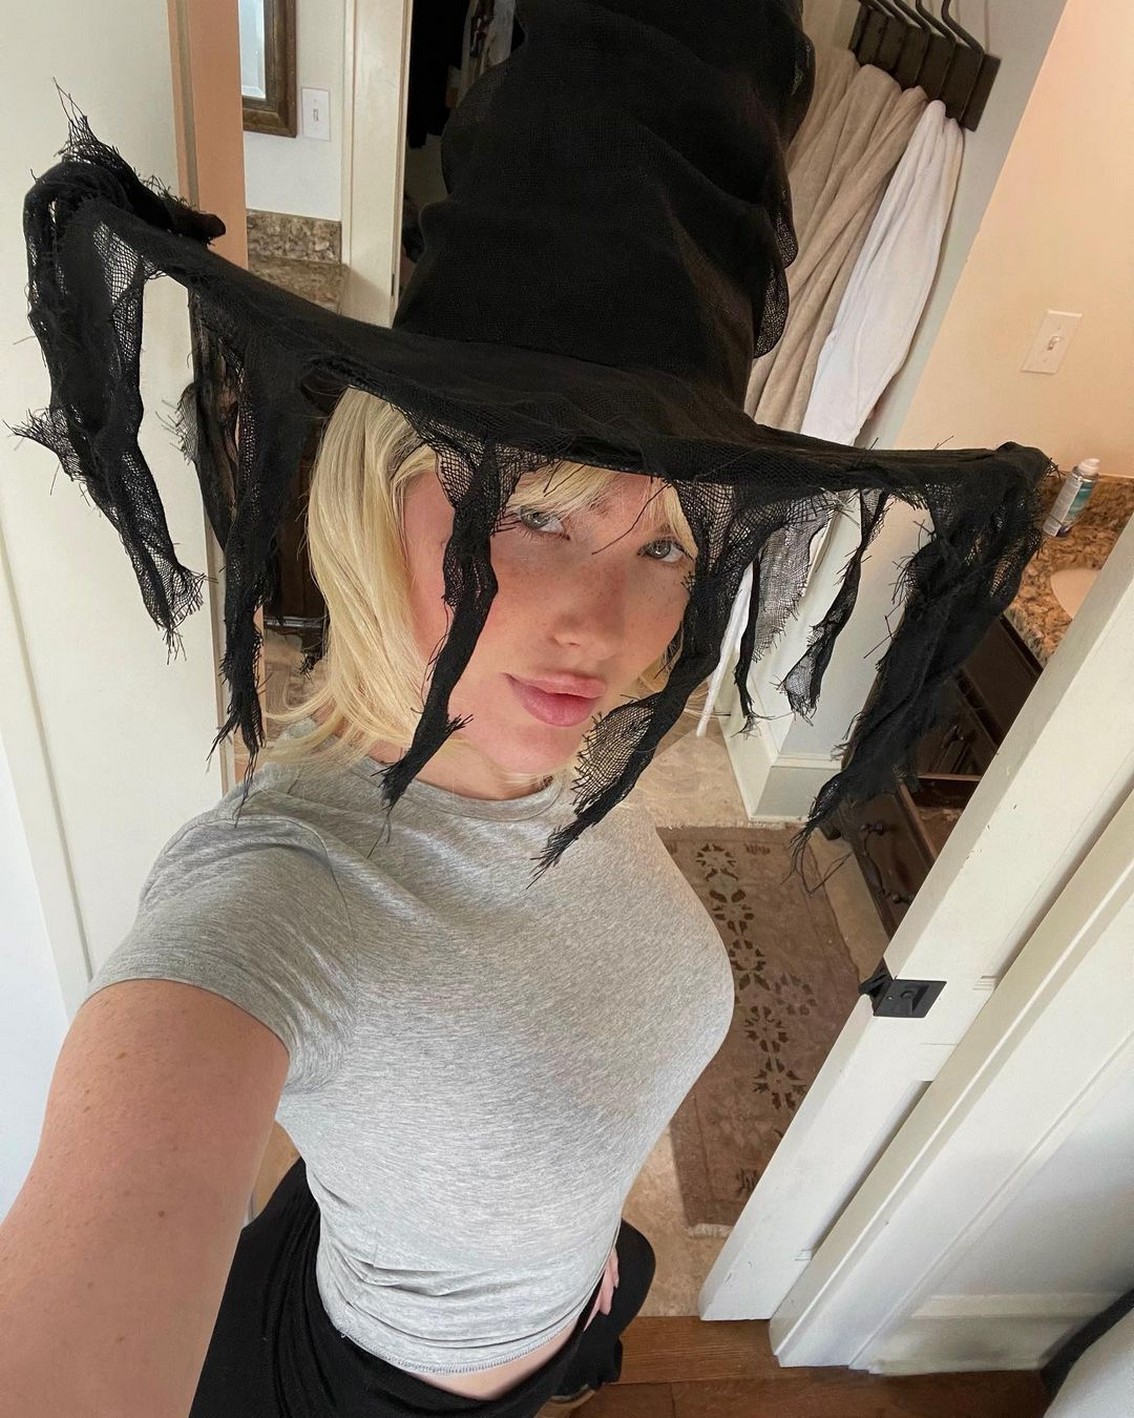 Join Maddy Cloud as she embraces the Halloween spirit with a witch hat and a sprinkle of freckles on her lovely face. Stay tuned for more updates on her festive look as she tantalizes us with her charming presence. Keep an eye out for the next post to see what other surprises she has in store for us!